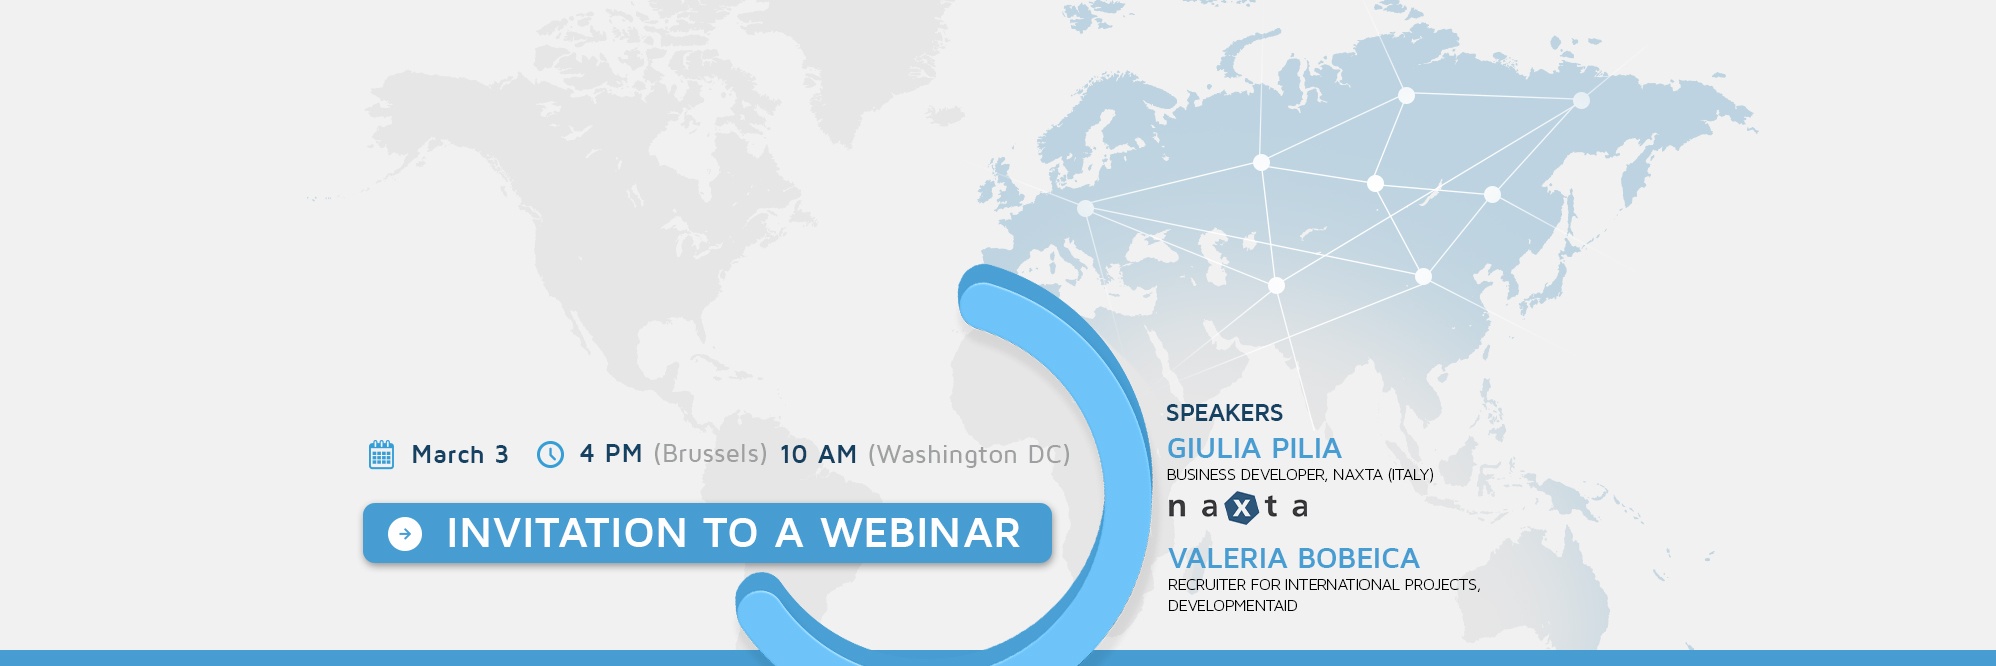 How to secure jobs and assignments in the development sector: Tips from top recruiters | Invitation to a Webinar